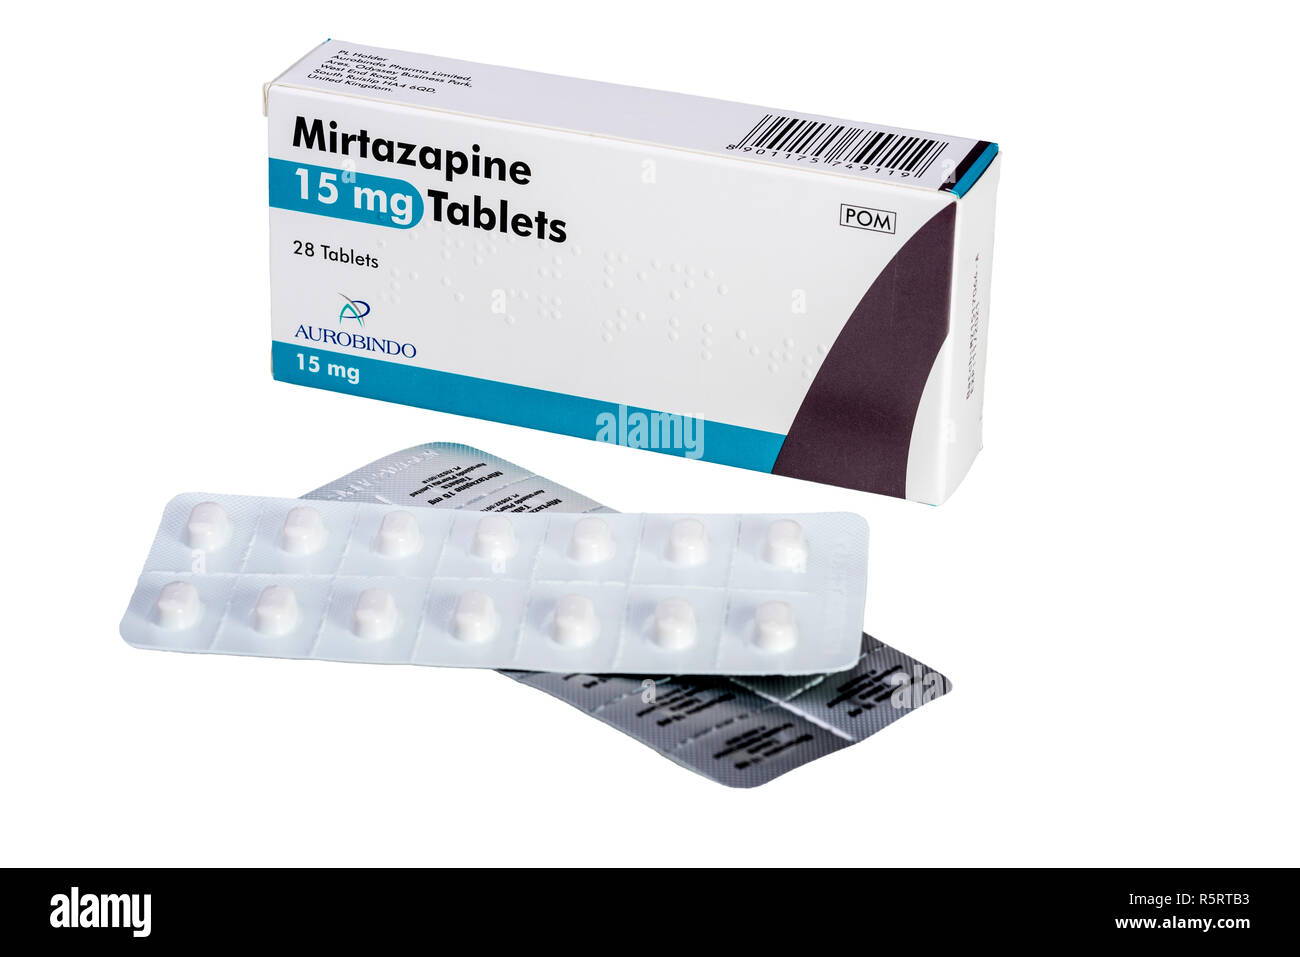 is mirtazapine a good drug for depression